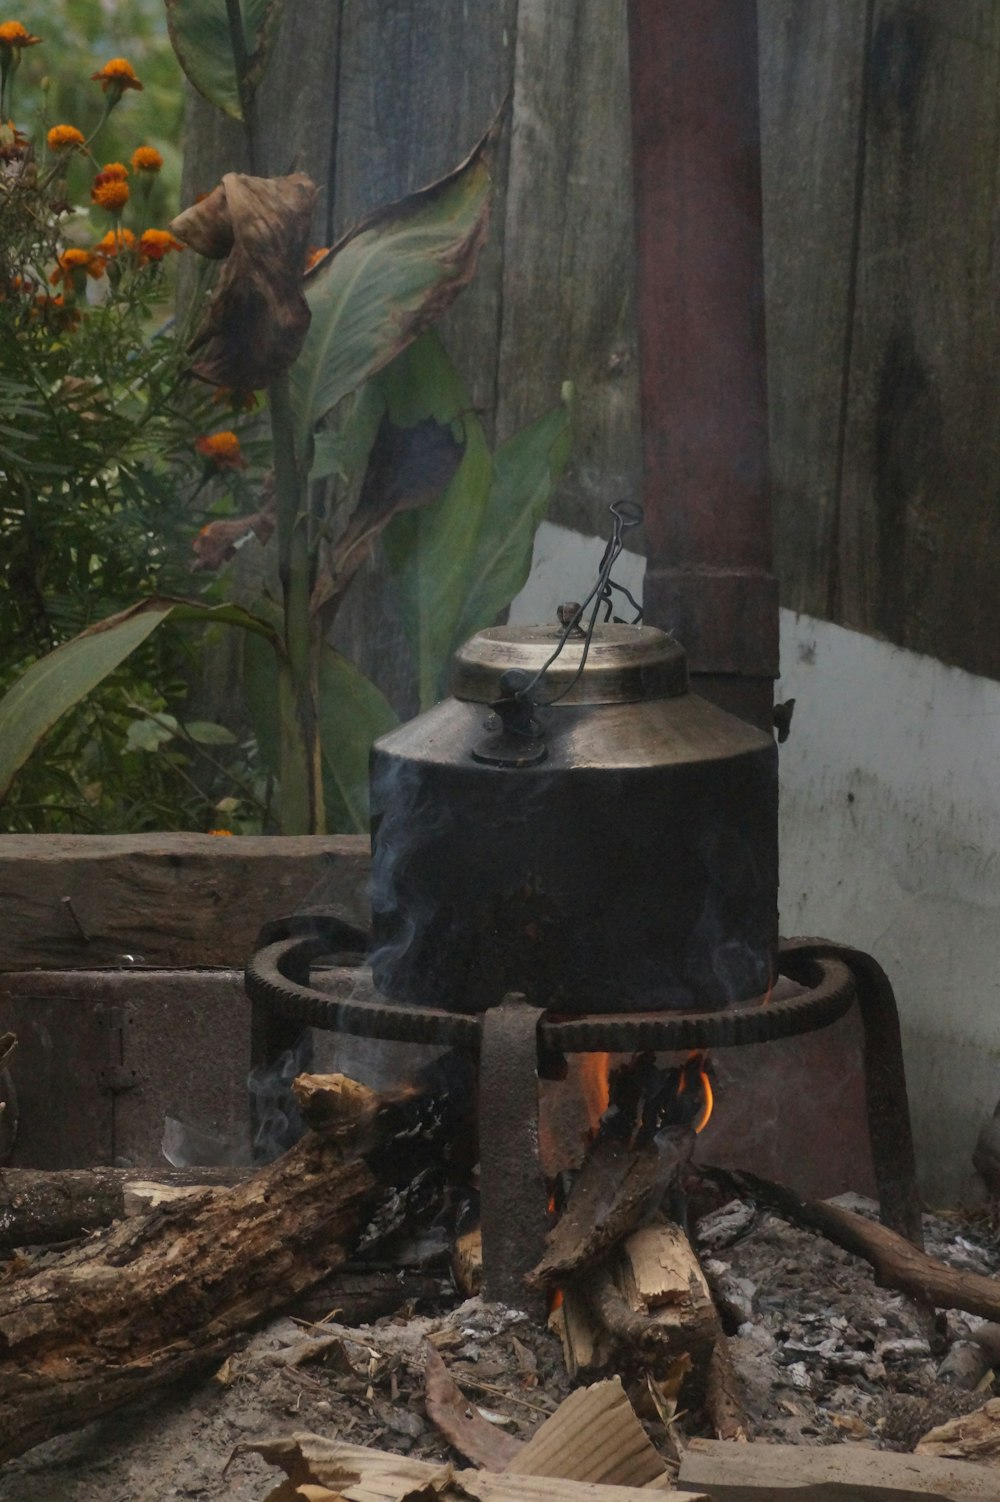 a kettle sitting on top of a stove next to a pile of wood